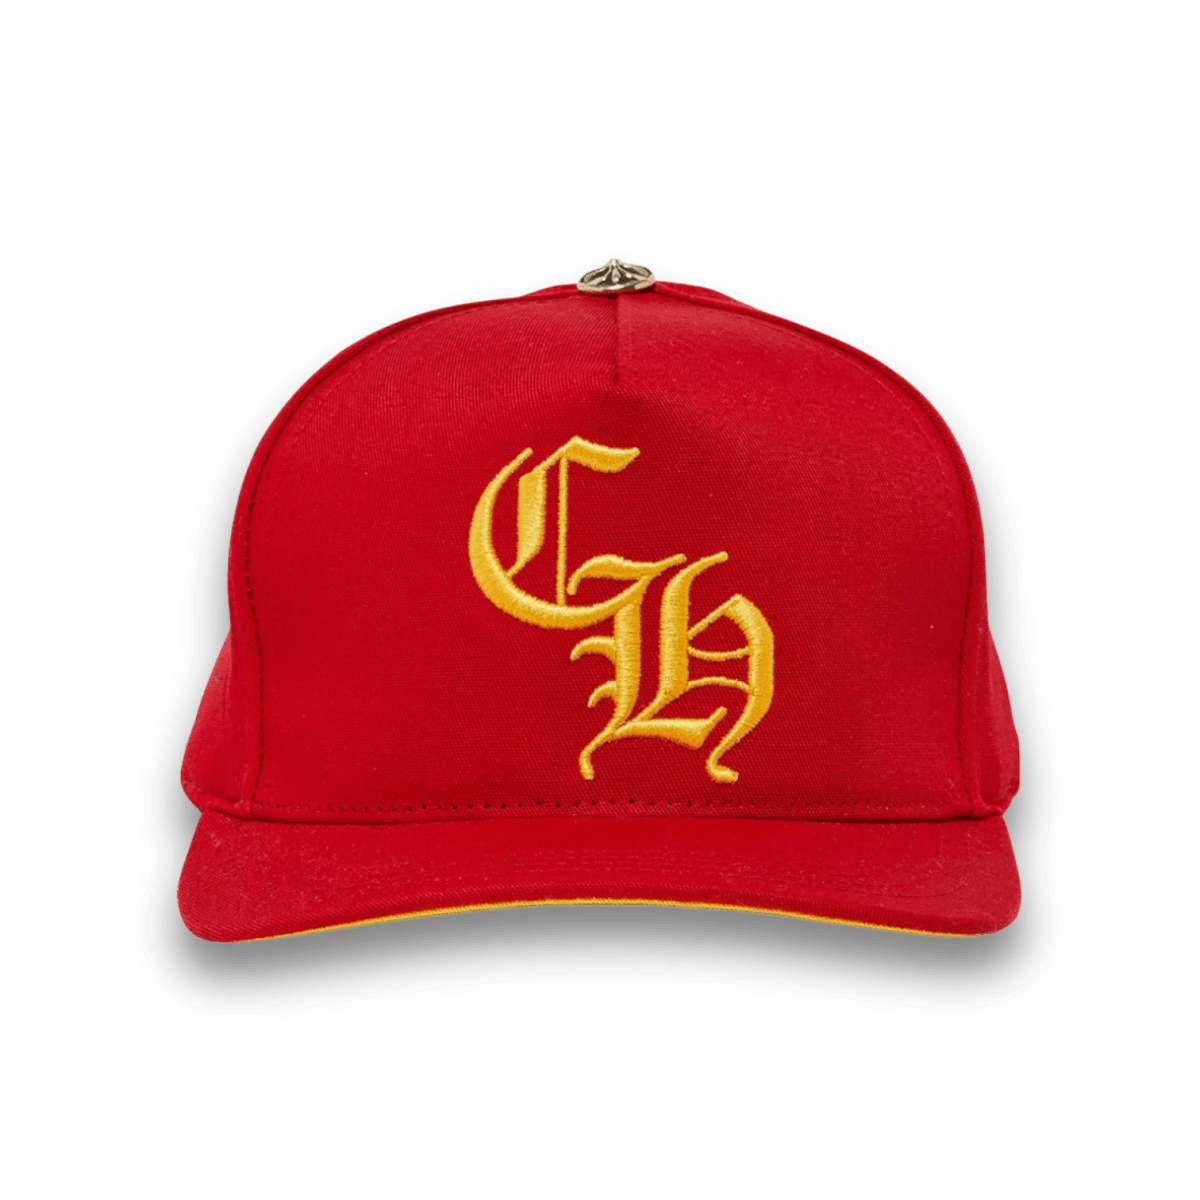 Chrome Hearts Baseball Hat 'Red/Yellow' - Headwear - Chrome Hearts - Jawns on Fire - sneakers